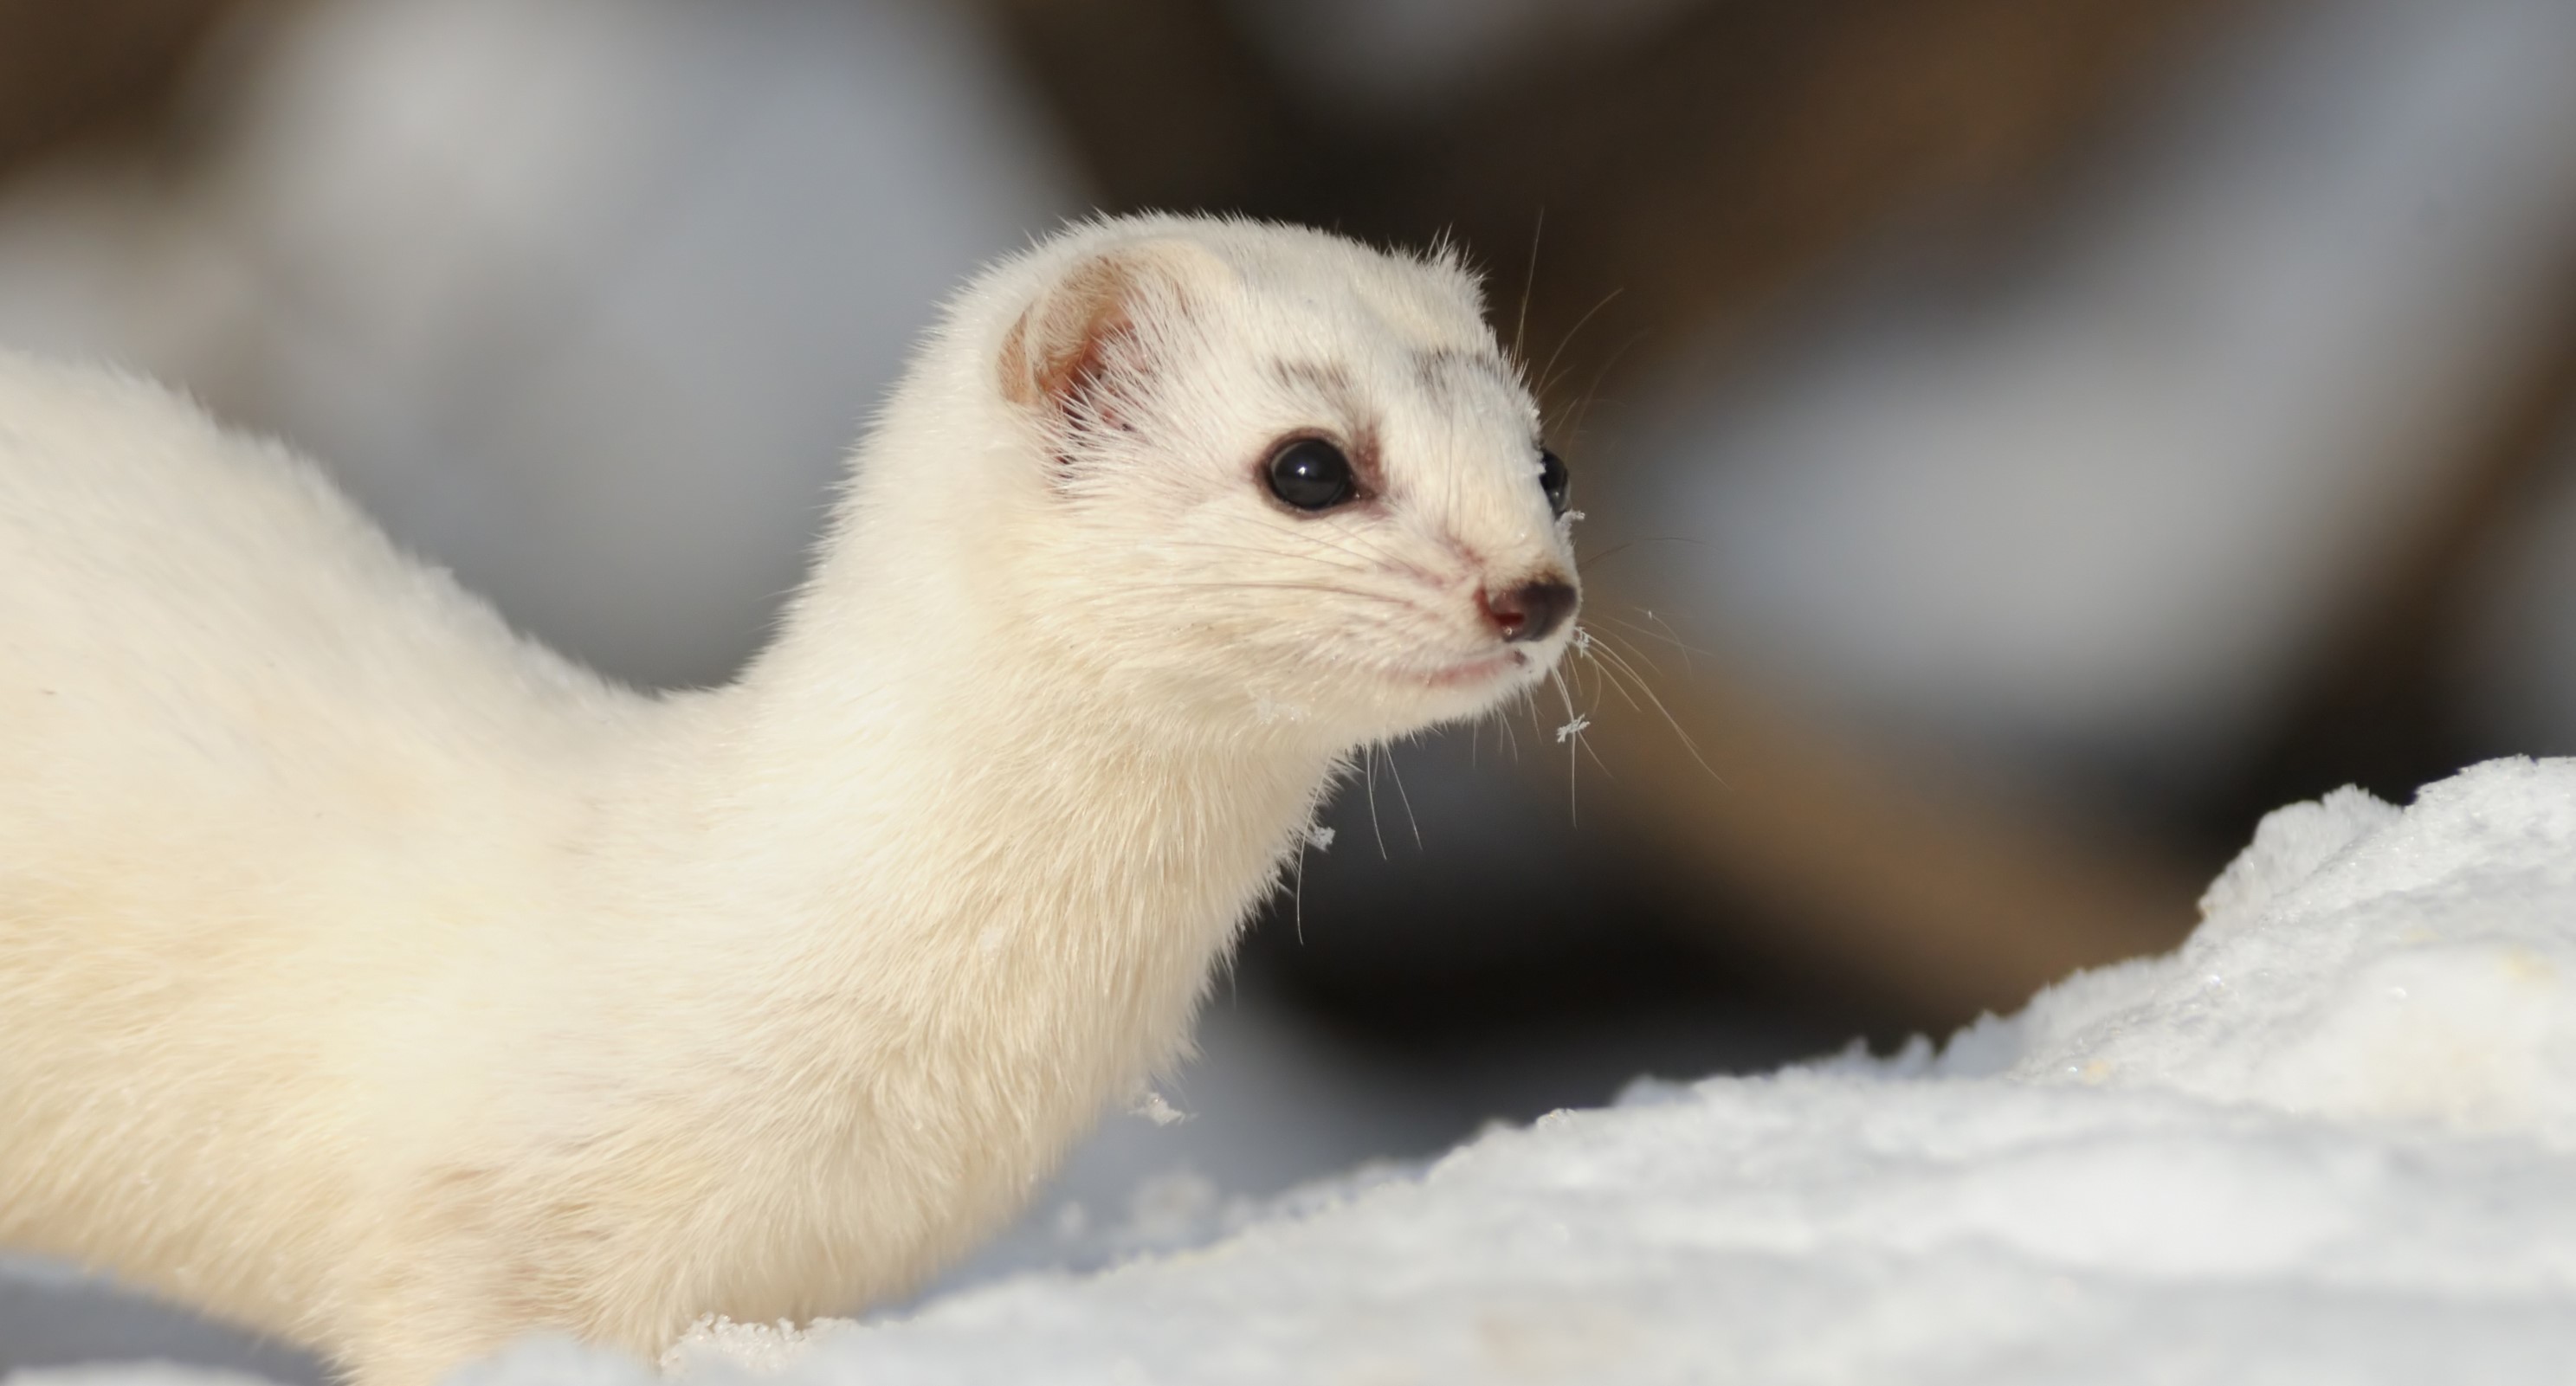 A least weasel blending in with snow-covered ground.